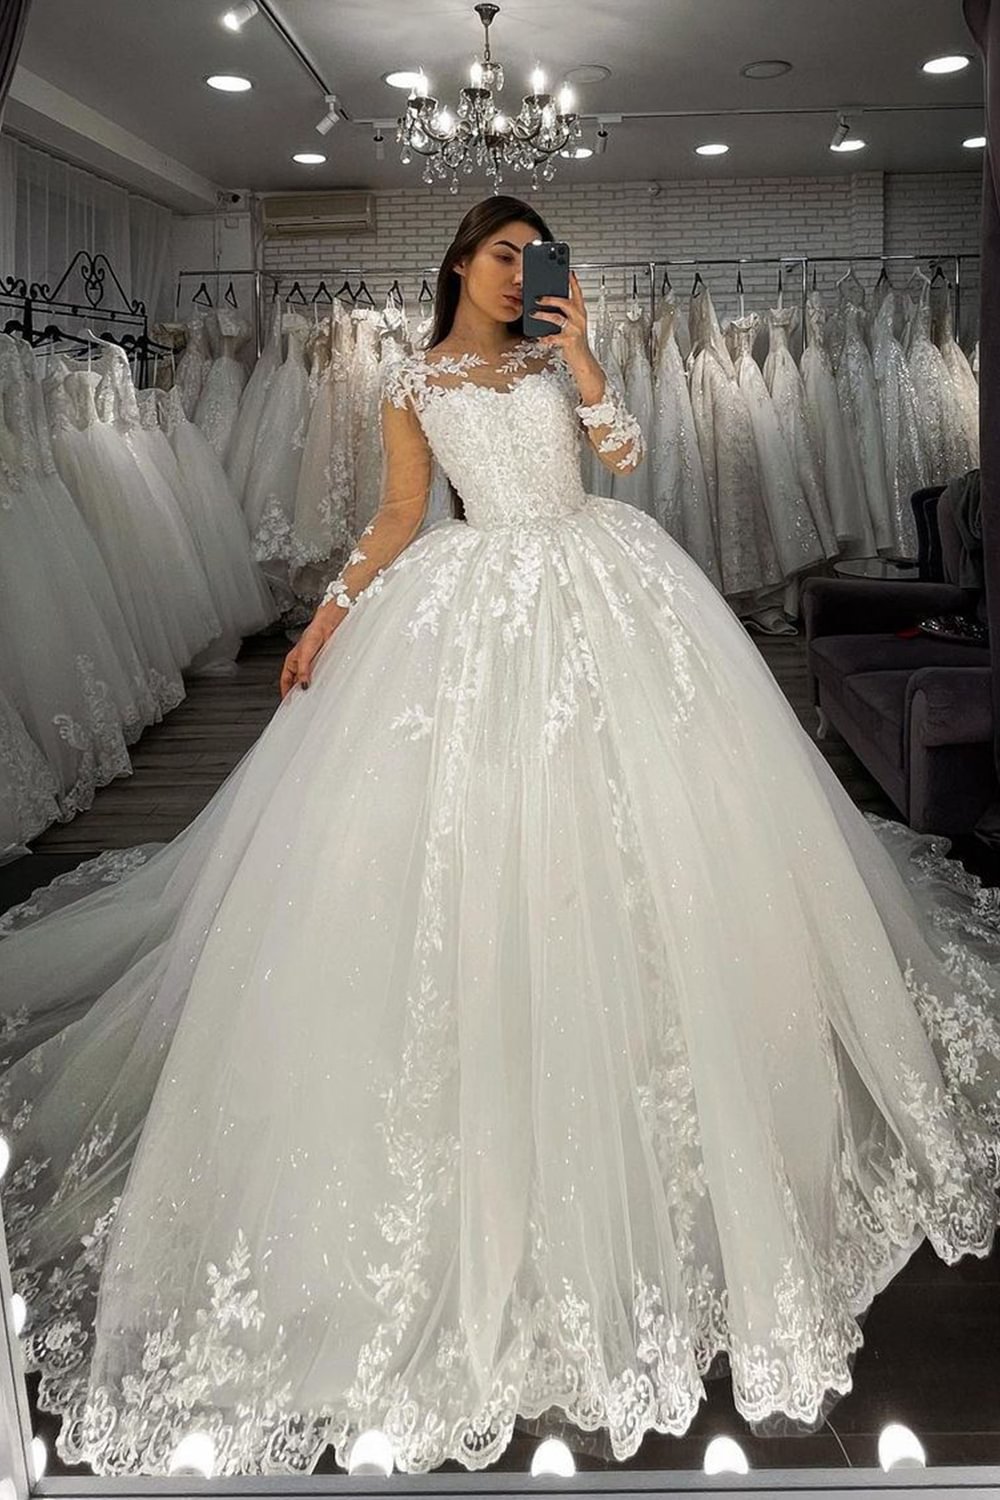 Chic Long Sleeves Ball Gown Sheer Tulle Wedding Dress With Appliques | Ballbellas Ballbellas